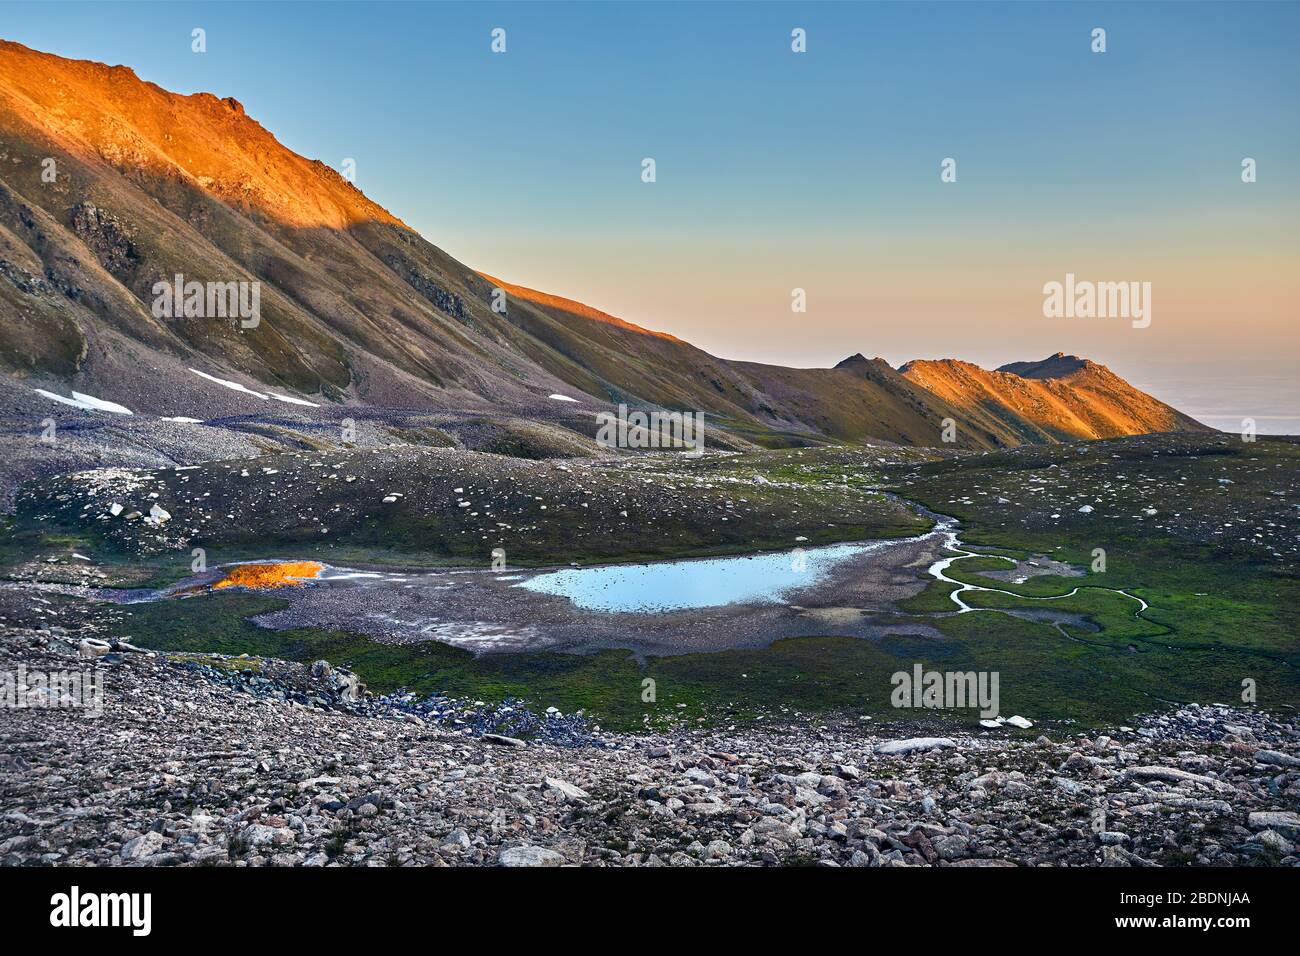 Landscape of Mountain Lake with river reflection at sunrise sky background Stock Photo